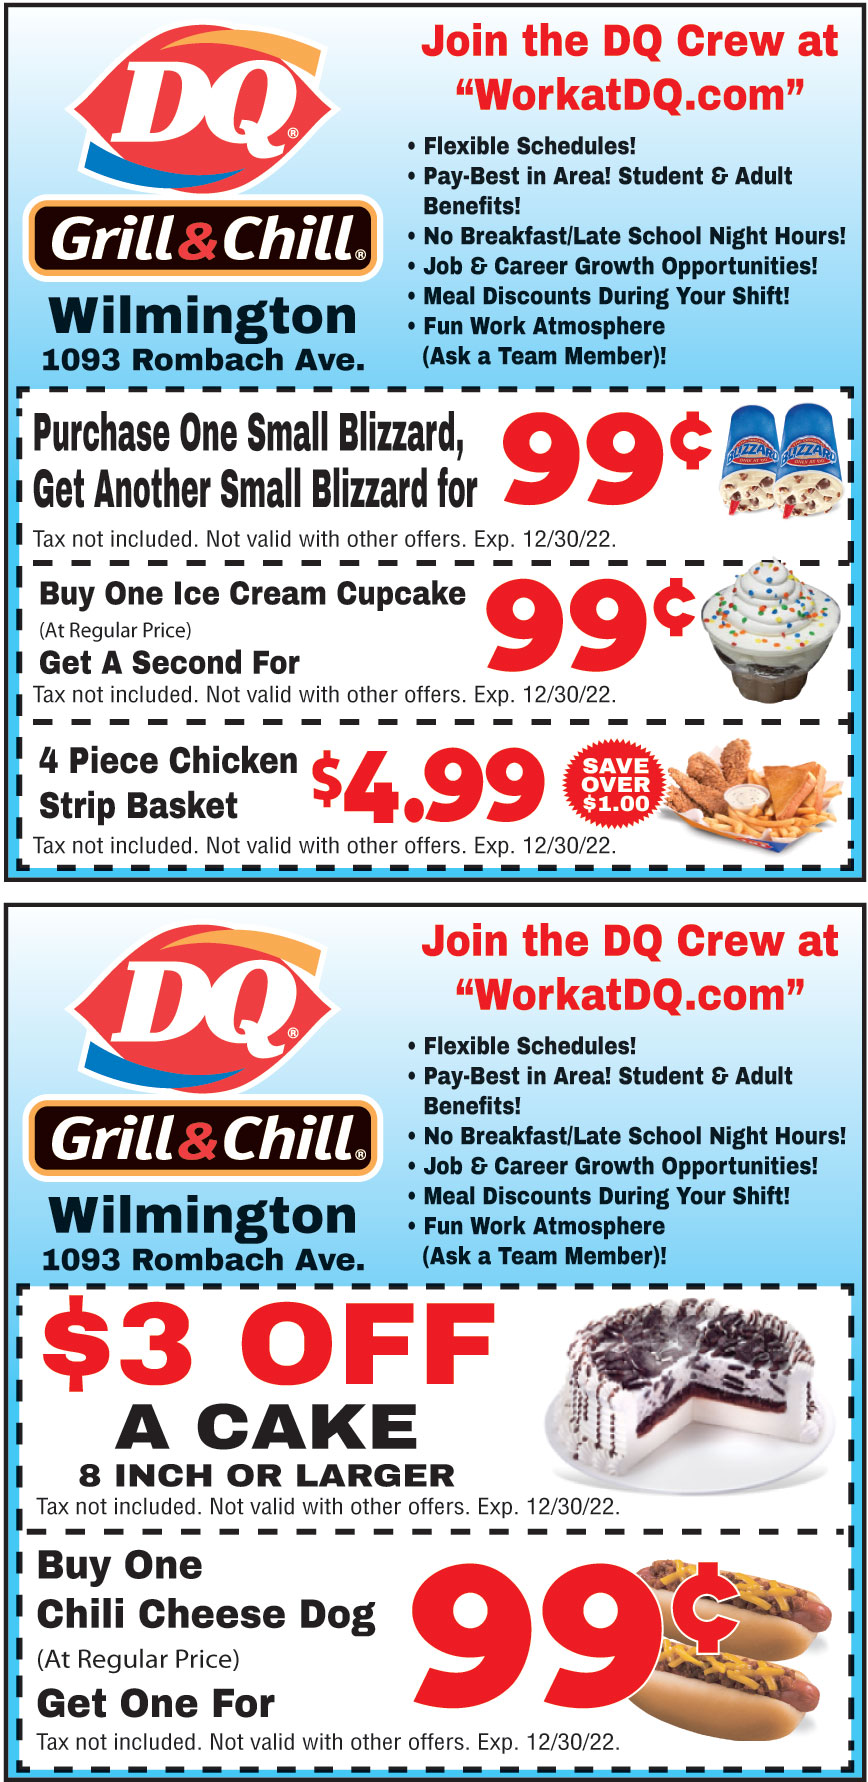 DAIRY QUEEN GRILL